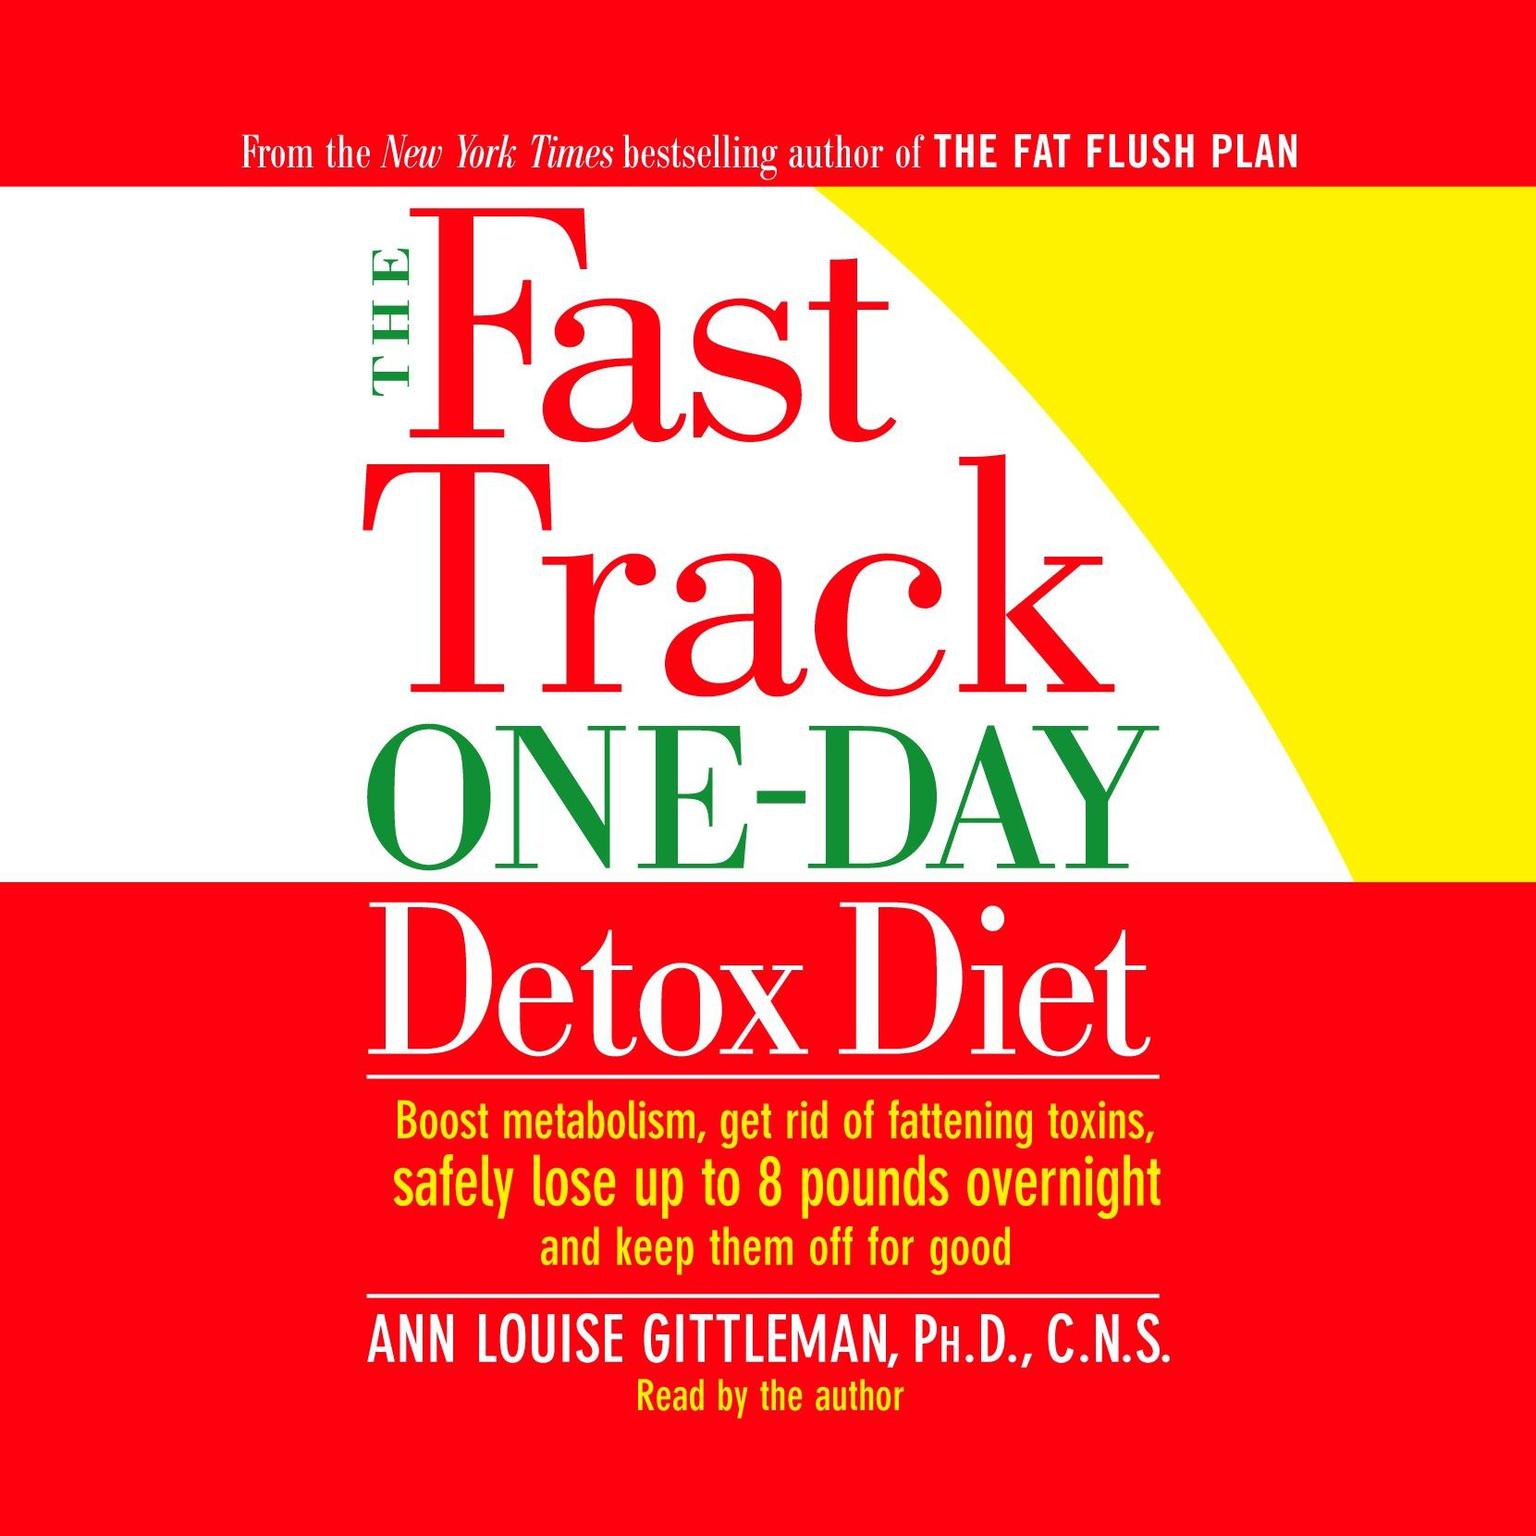 The Fast Track One-Day Detox Diet (Abridged): Boost metabolism, get rid of fattening toxins, lose up to 8 pounds overnight and keep it off for good Audiobook, by Ann Louise Gittleman